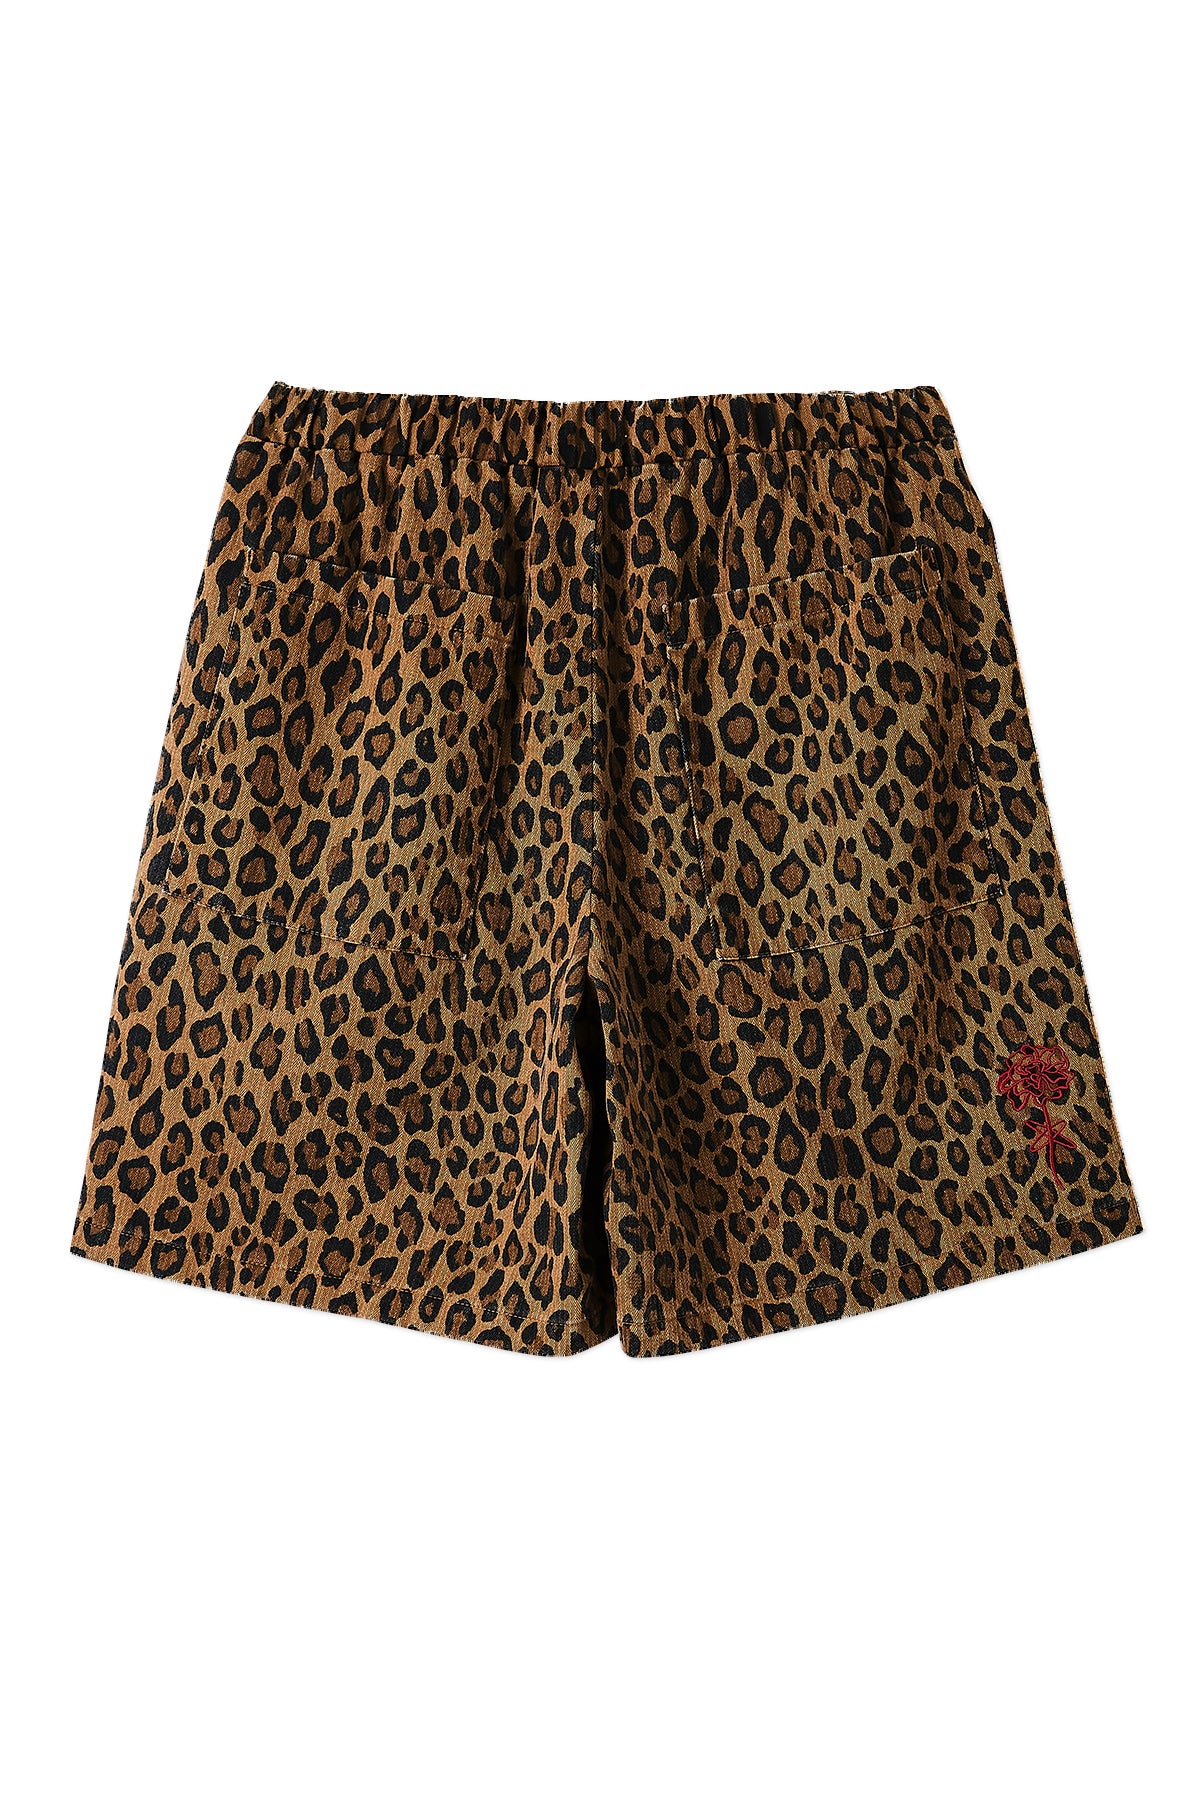 LEOPARD SHORTS – FLOWER OF THE UNIVERSE